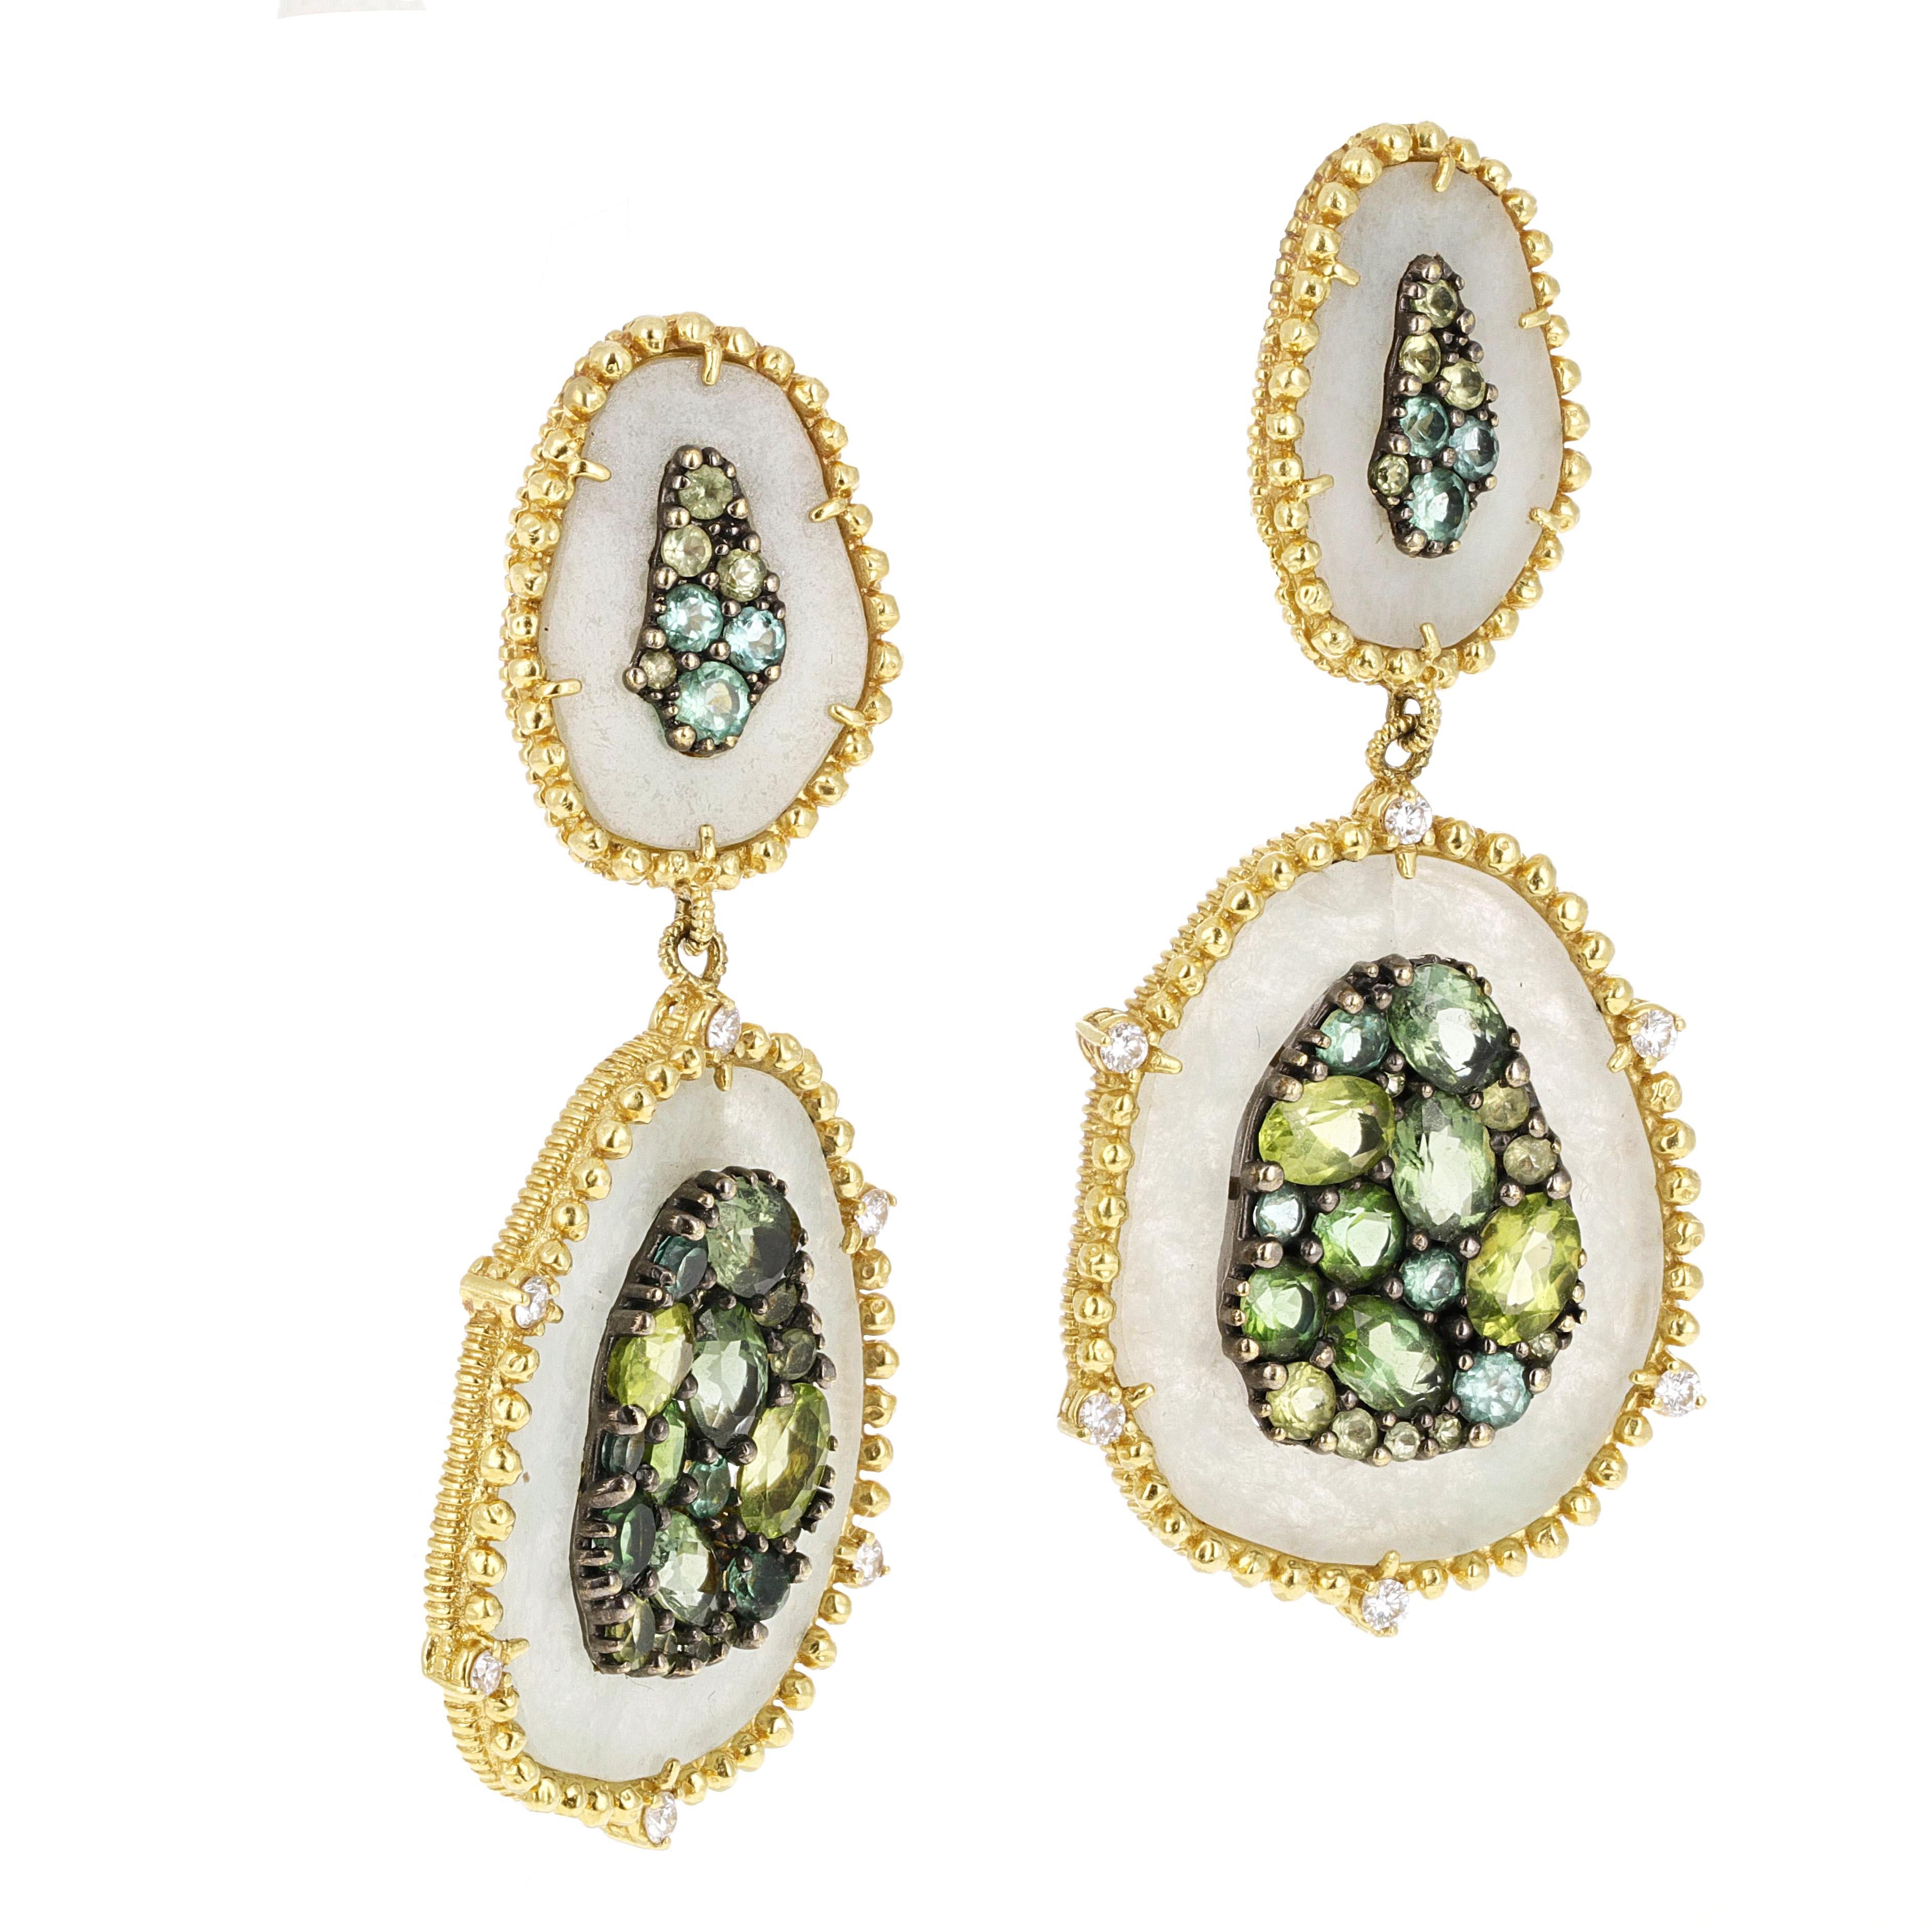 Judith Ripka 18 karat yellow gold green gemstone and diamond dangle earrings. There are 12 white round brilliant diamonds weighing an estimated 0.24 carats total weight. 

The earrings are stamped Judith Ripka. 
